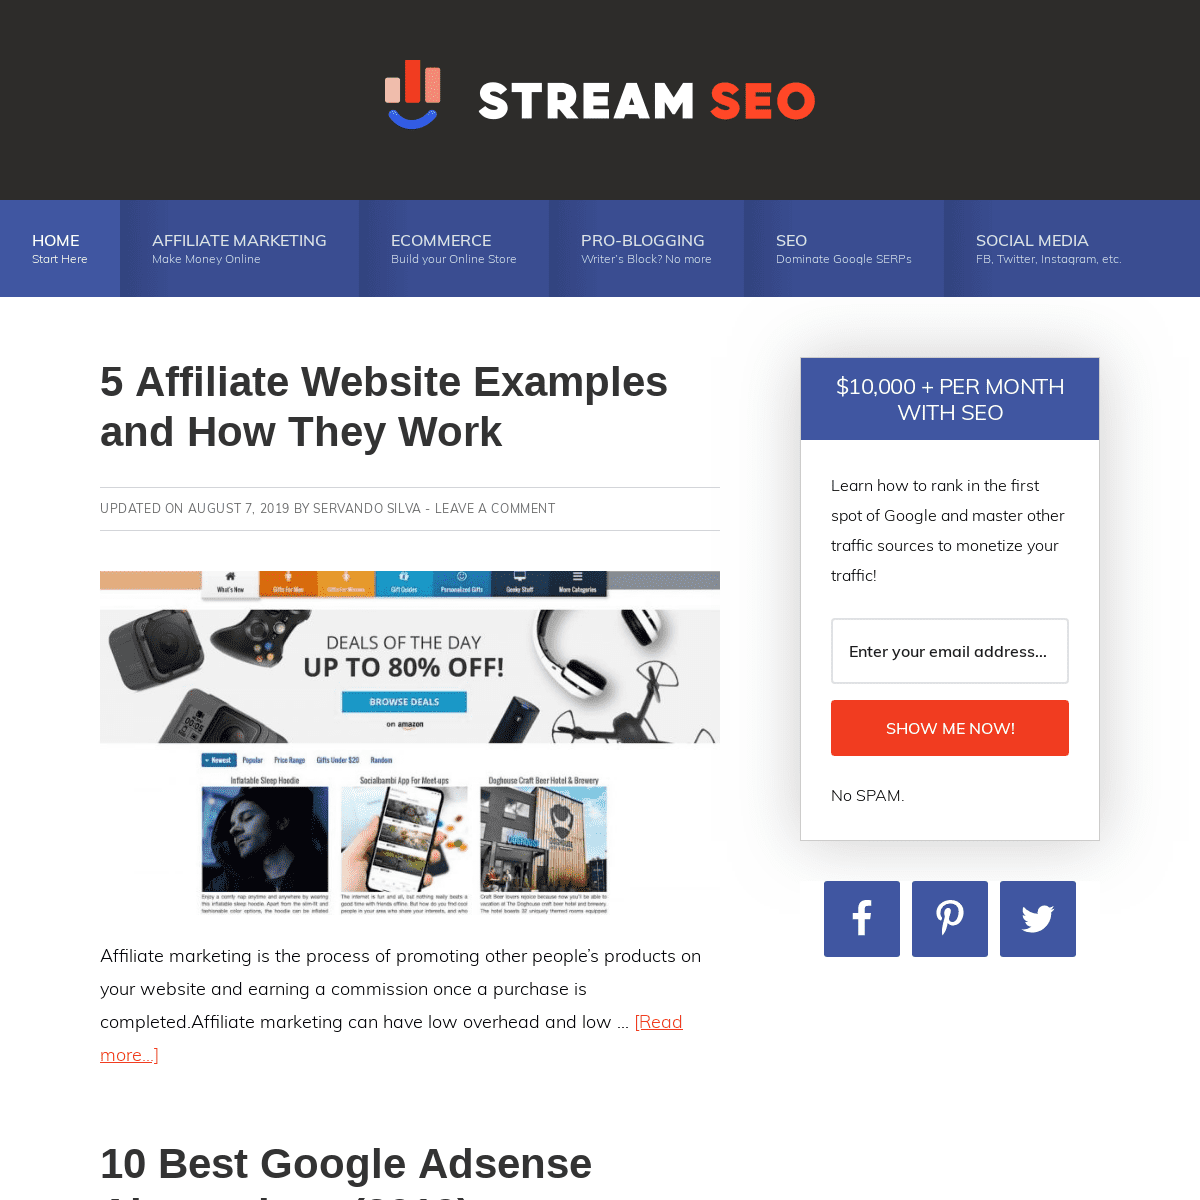 Stream SEO - Learn how to make $10,000+ per month with SEO